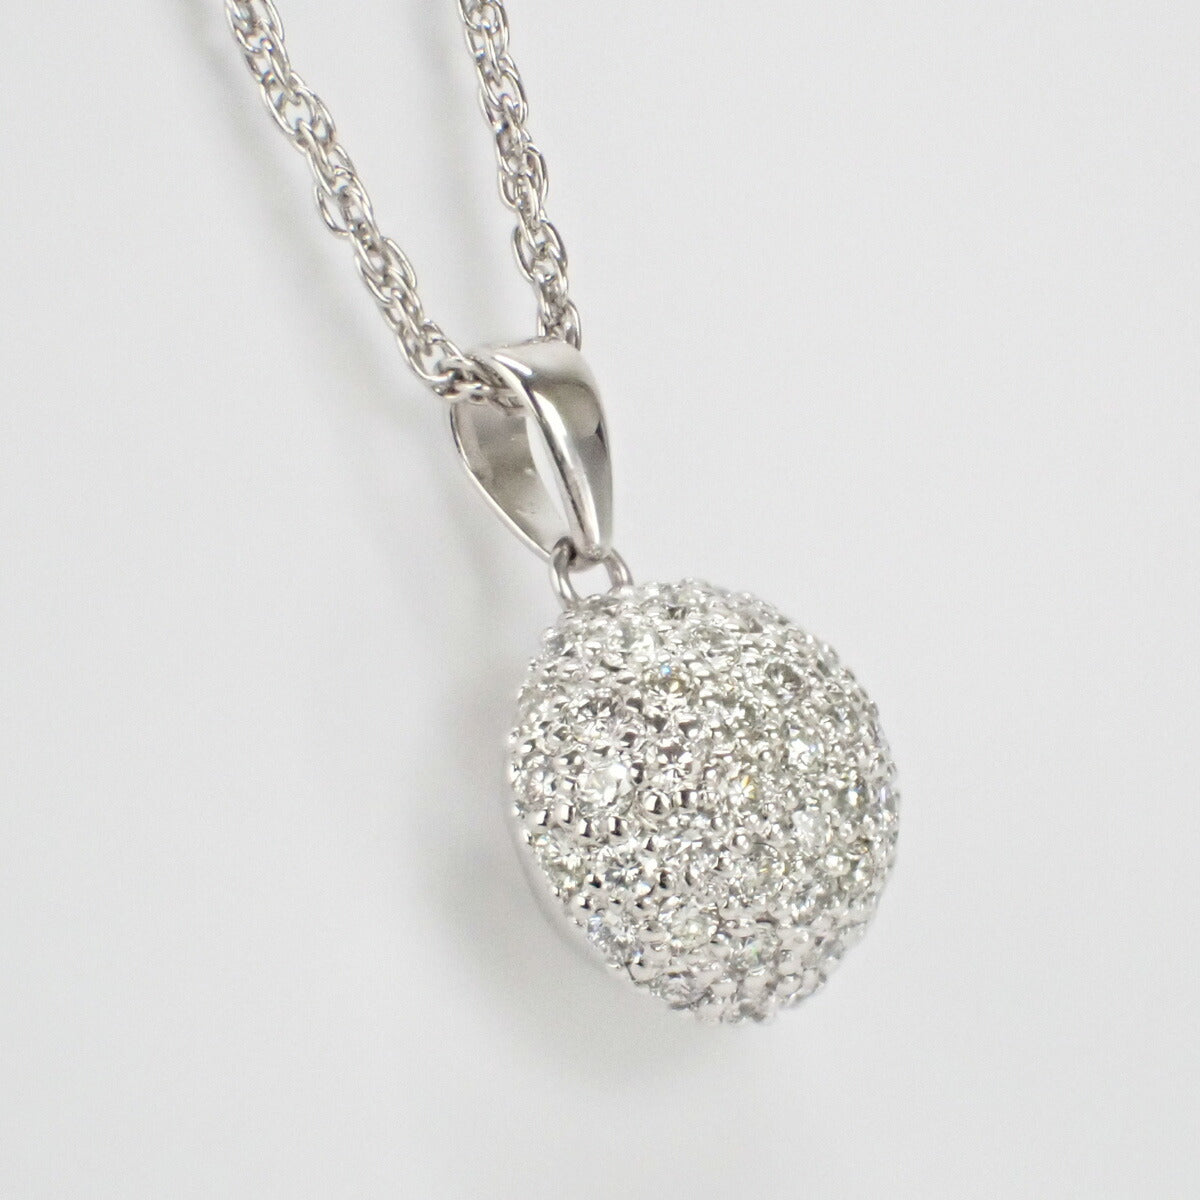 K18WG Ball Motif Diamond Necklace 1.041ct, White Gold and Silver Finish, Ladies (Pre-owned)